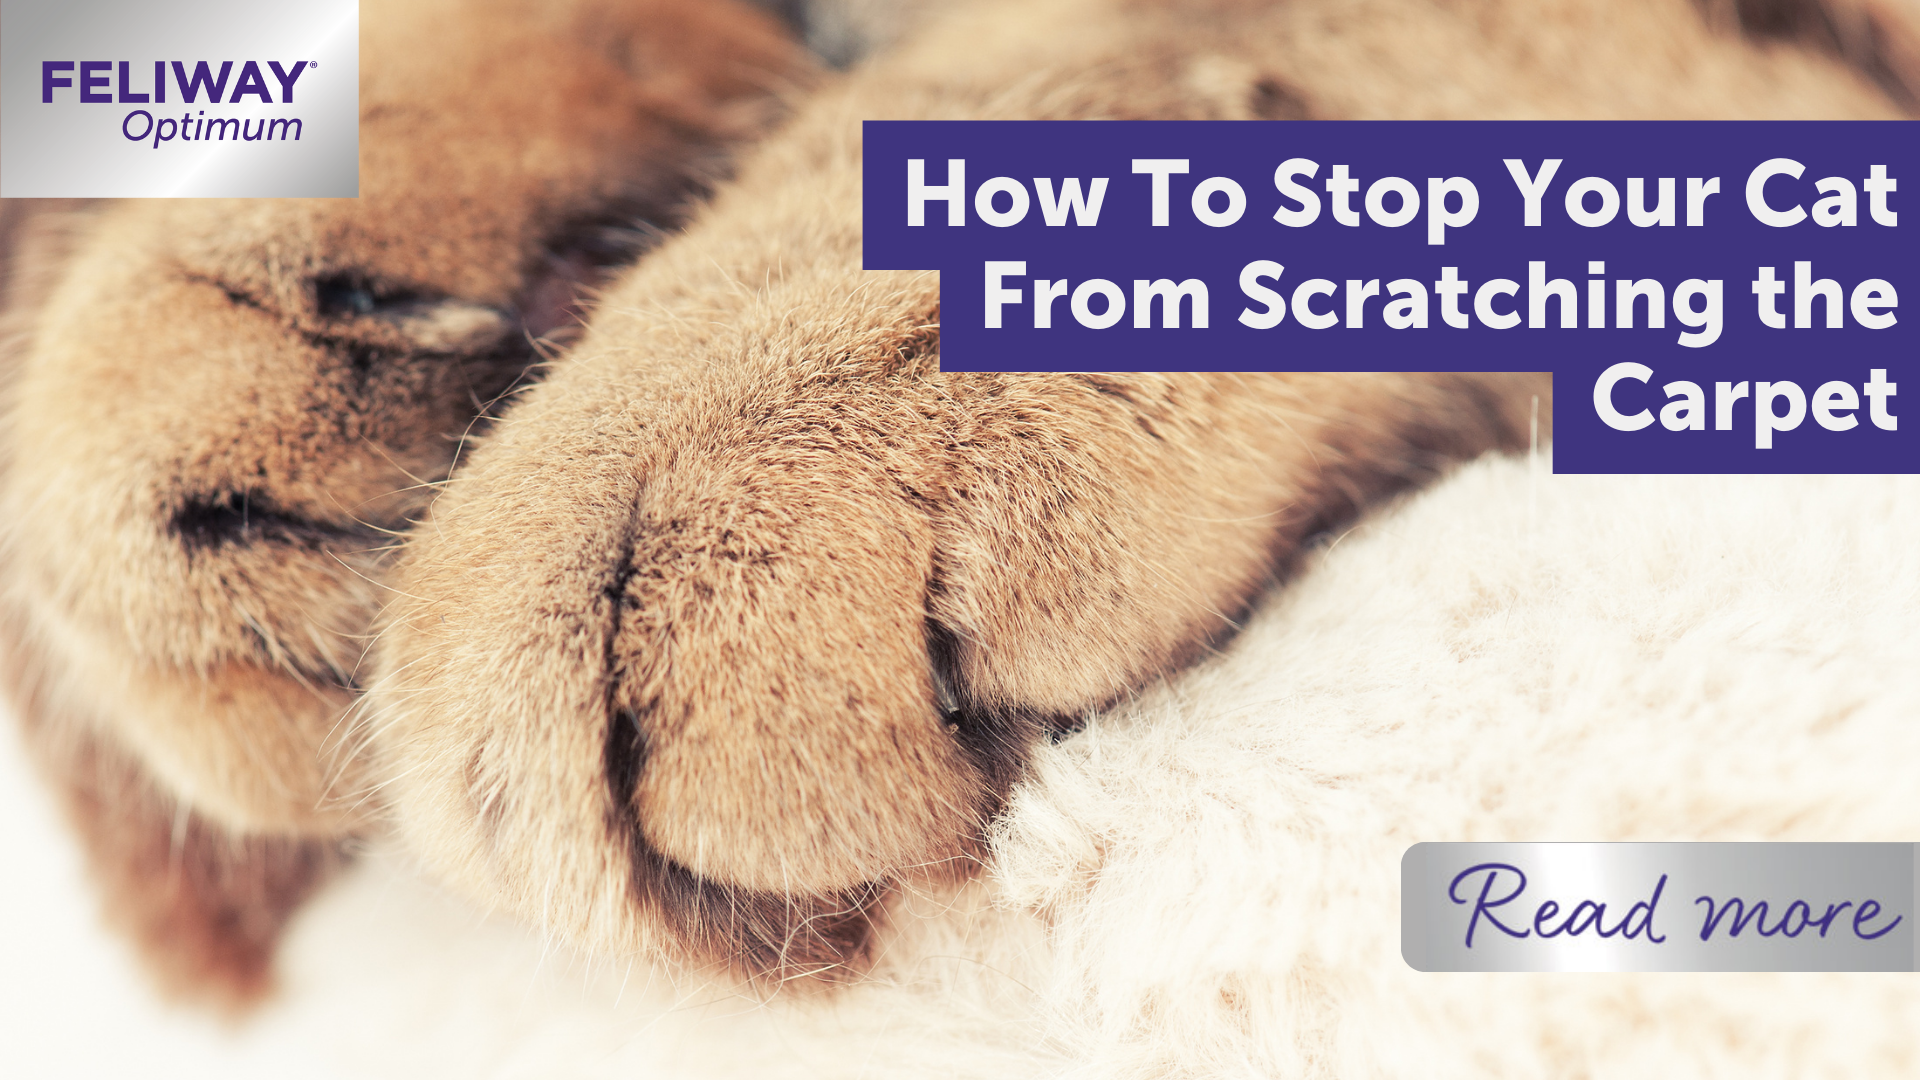 Why Do Cats Scratch? 3 Reasons, and How To Stop It